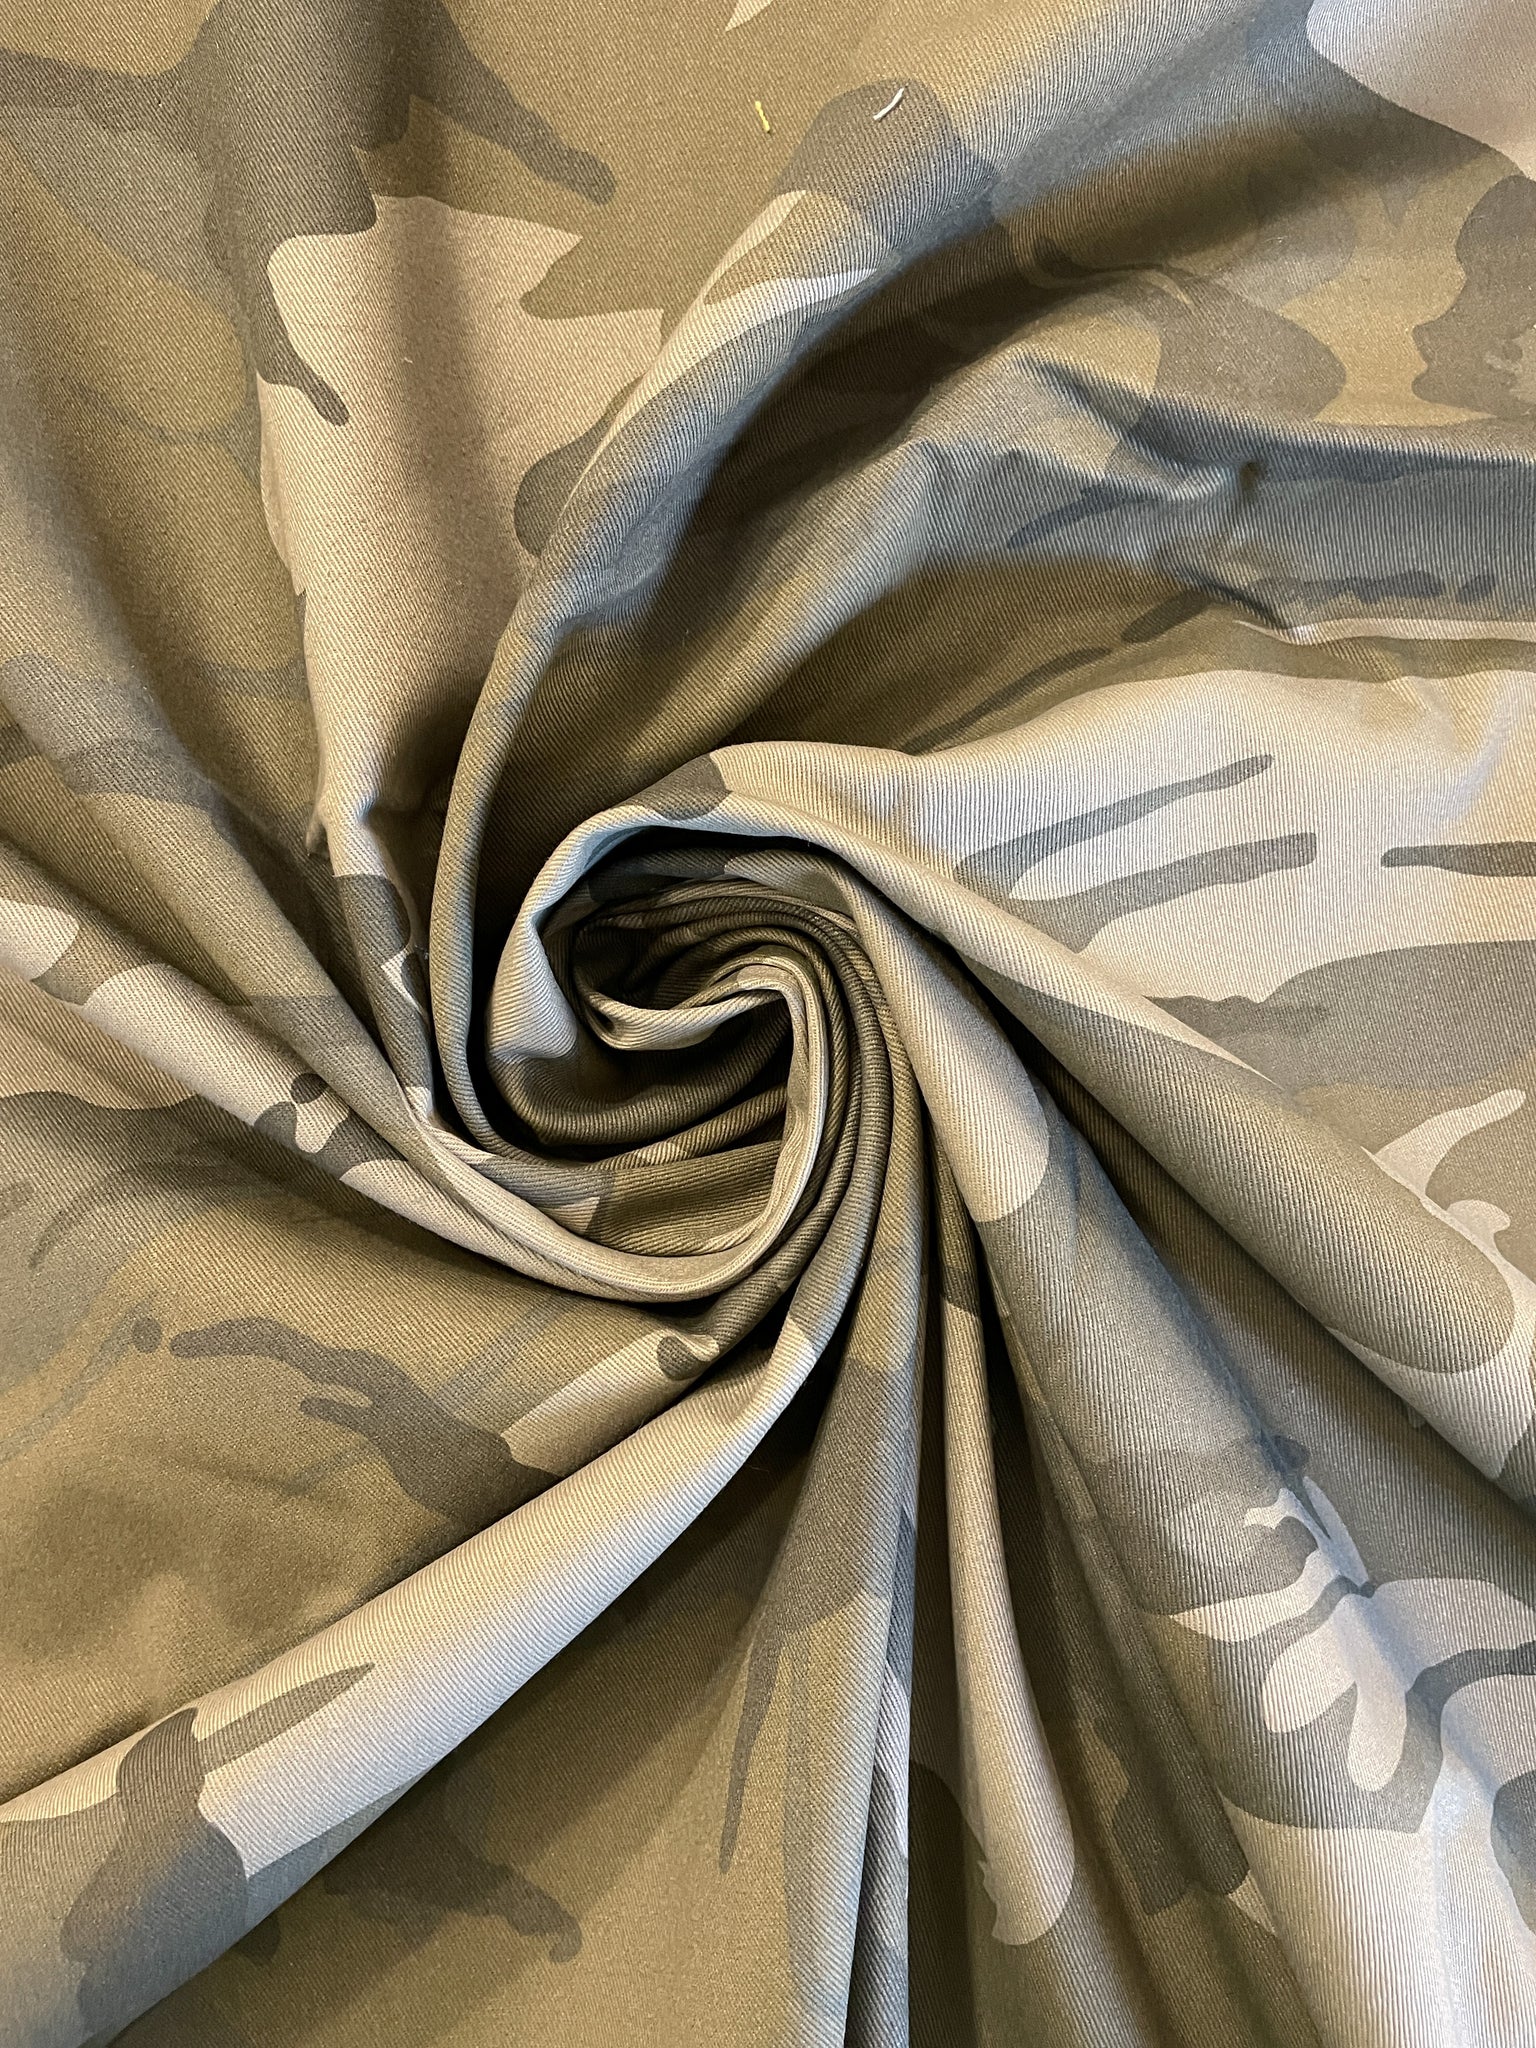 SALE 1 5/8+ YD Cotton Twill Camouflage - Gray, Green and Black